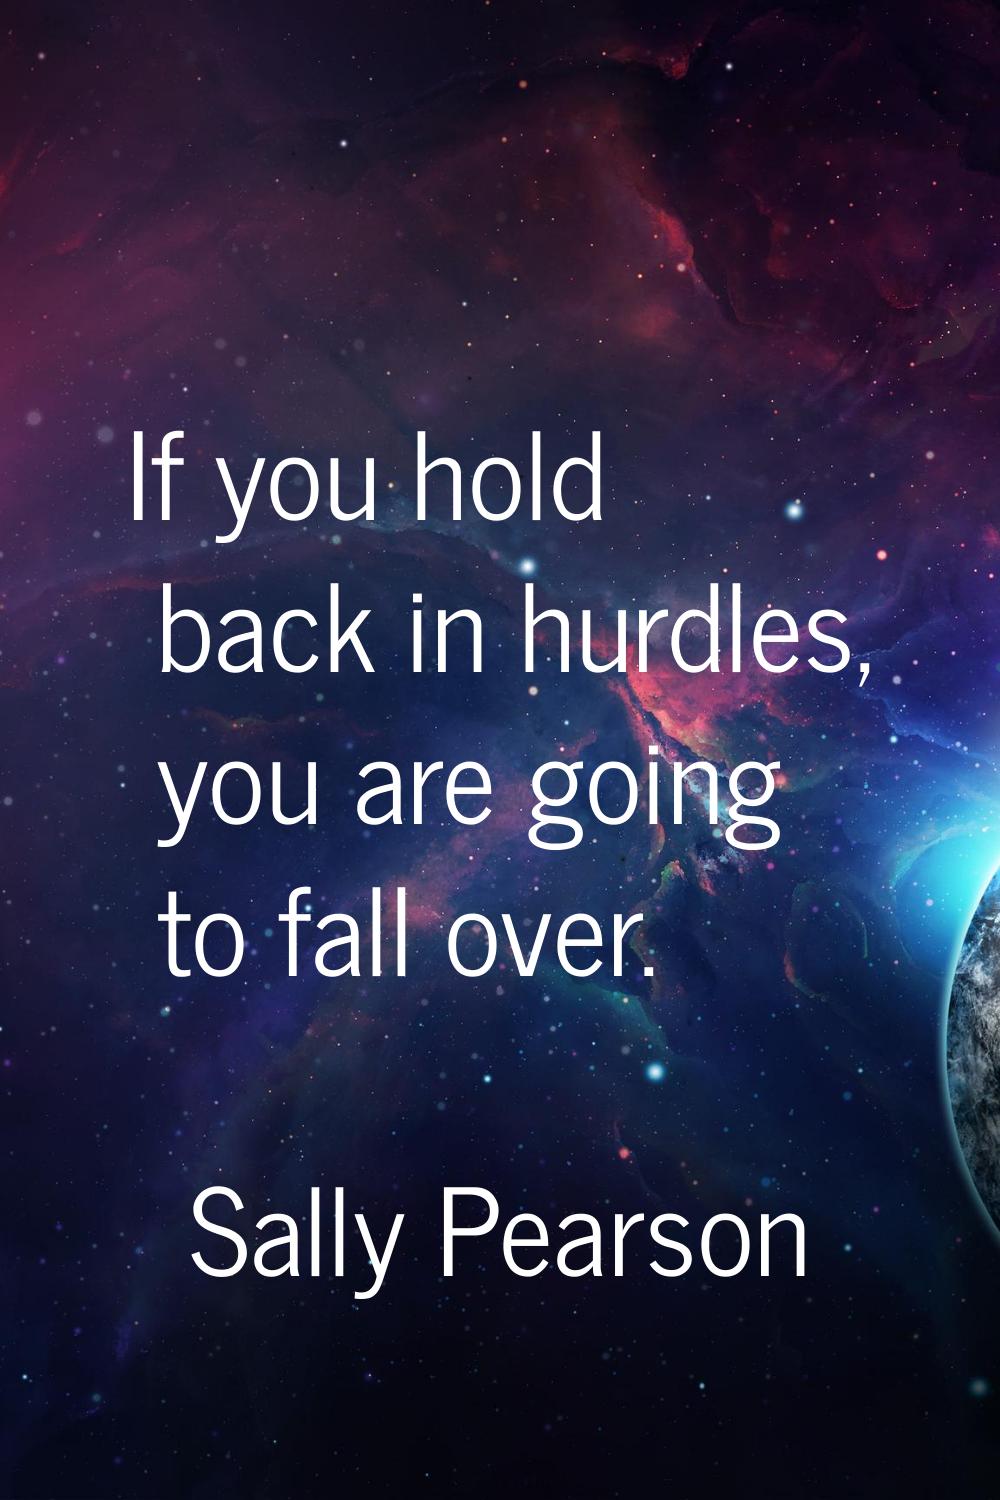 If you hold back in hurdles, you are going to fall over.